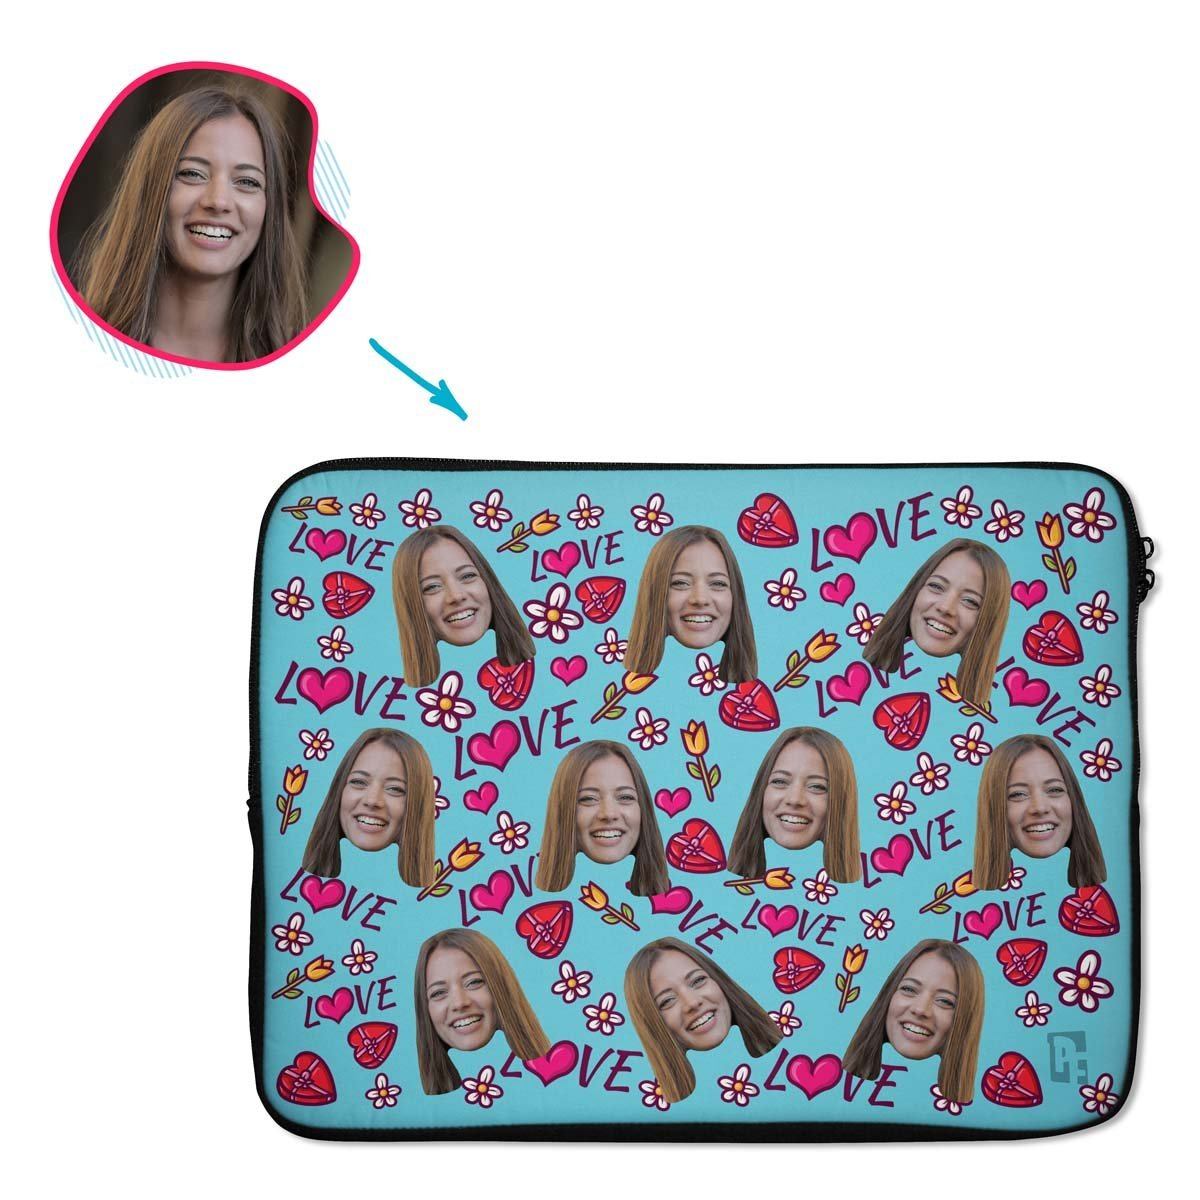 blue Hearts and Flowers laptop sleeve personalized with photo of face printed on them